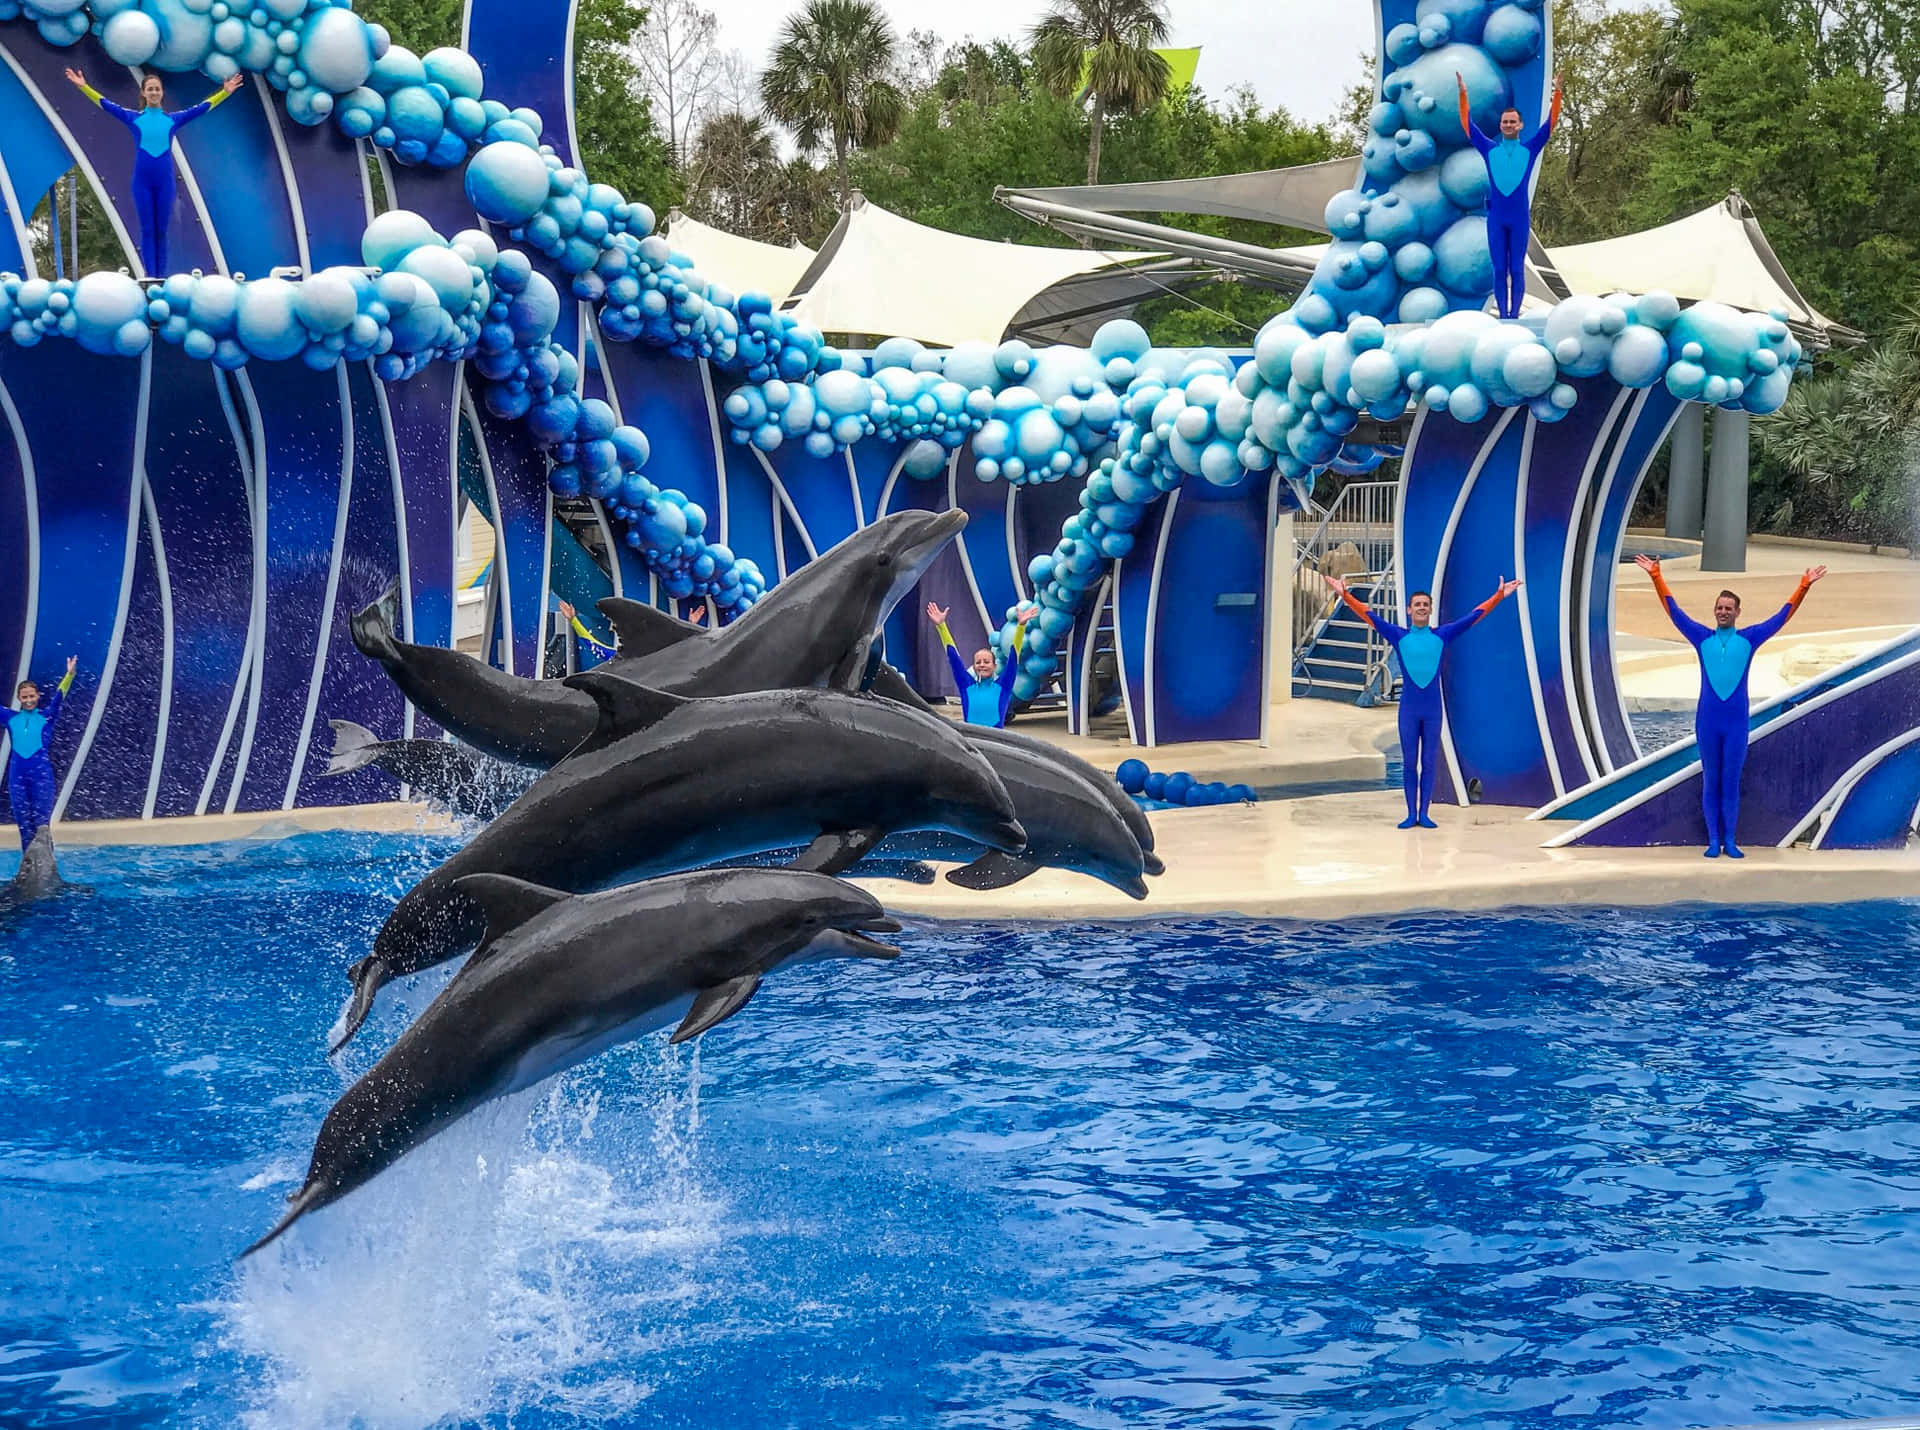 Dolphins Jumping In An Aquarium With Blue Balloons